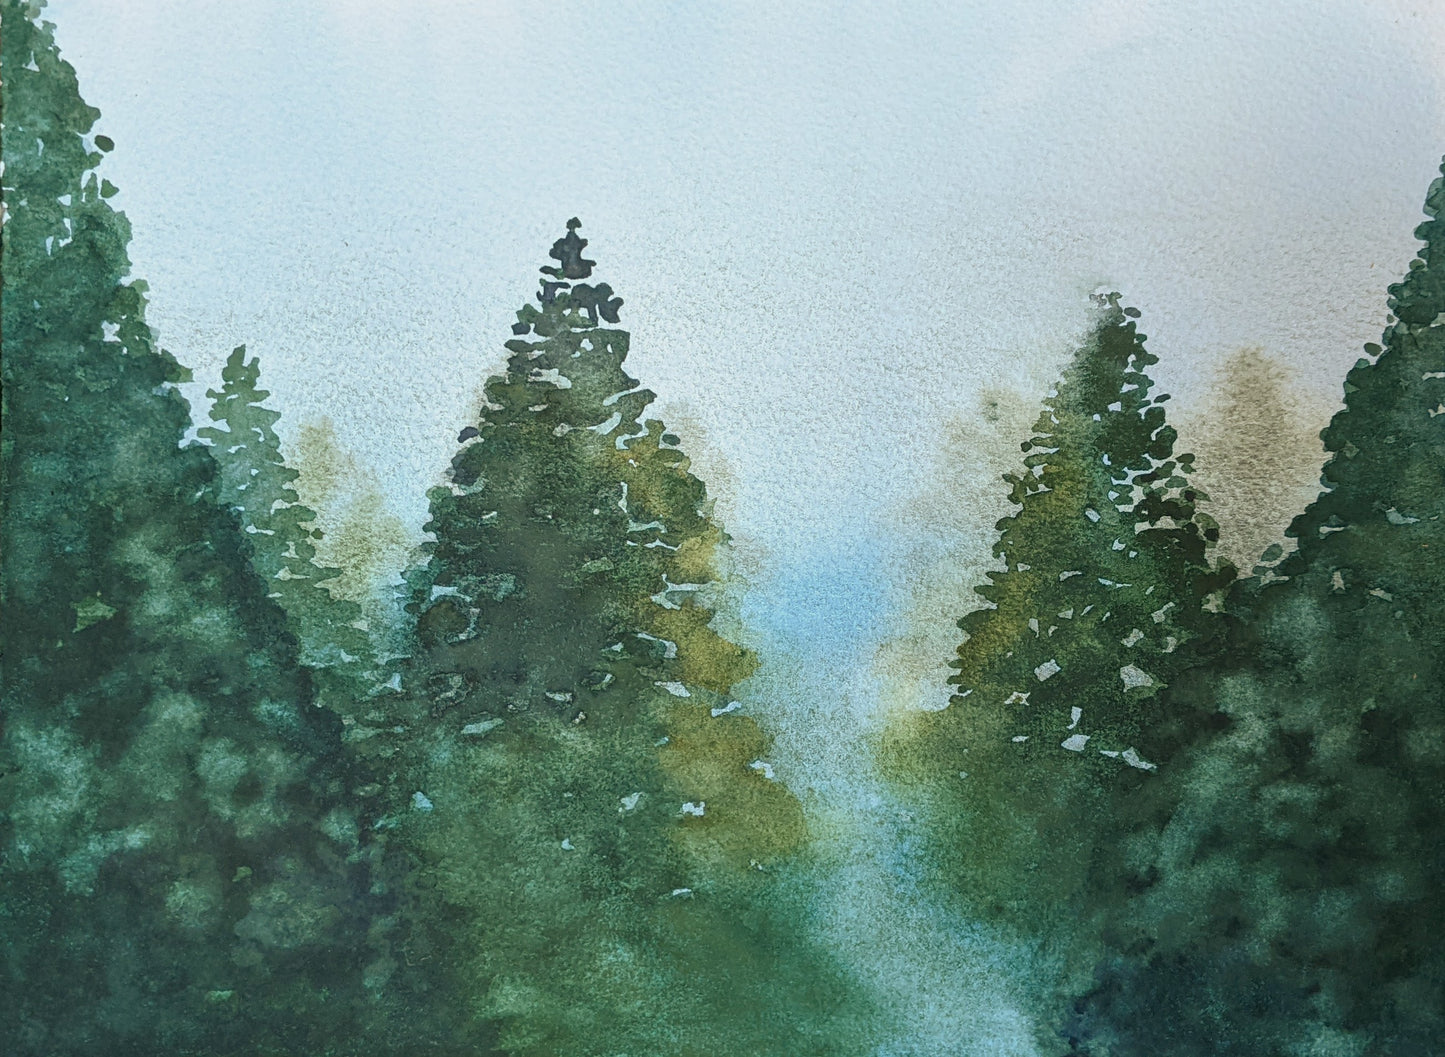 Winter Path (Finding a New Way Forward) watercolor on paper painting